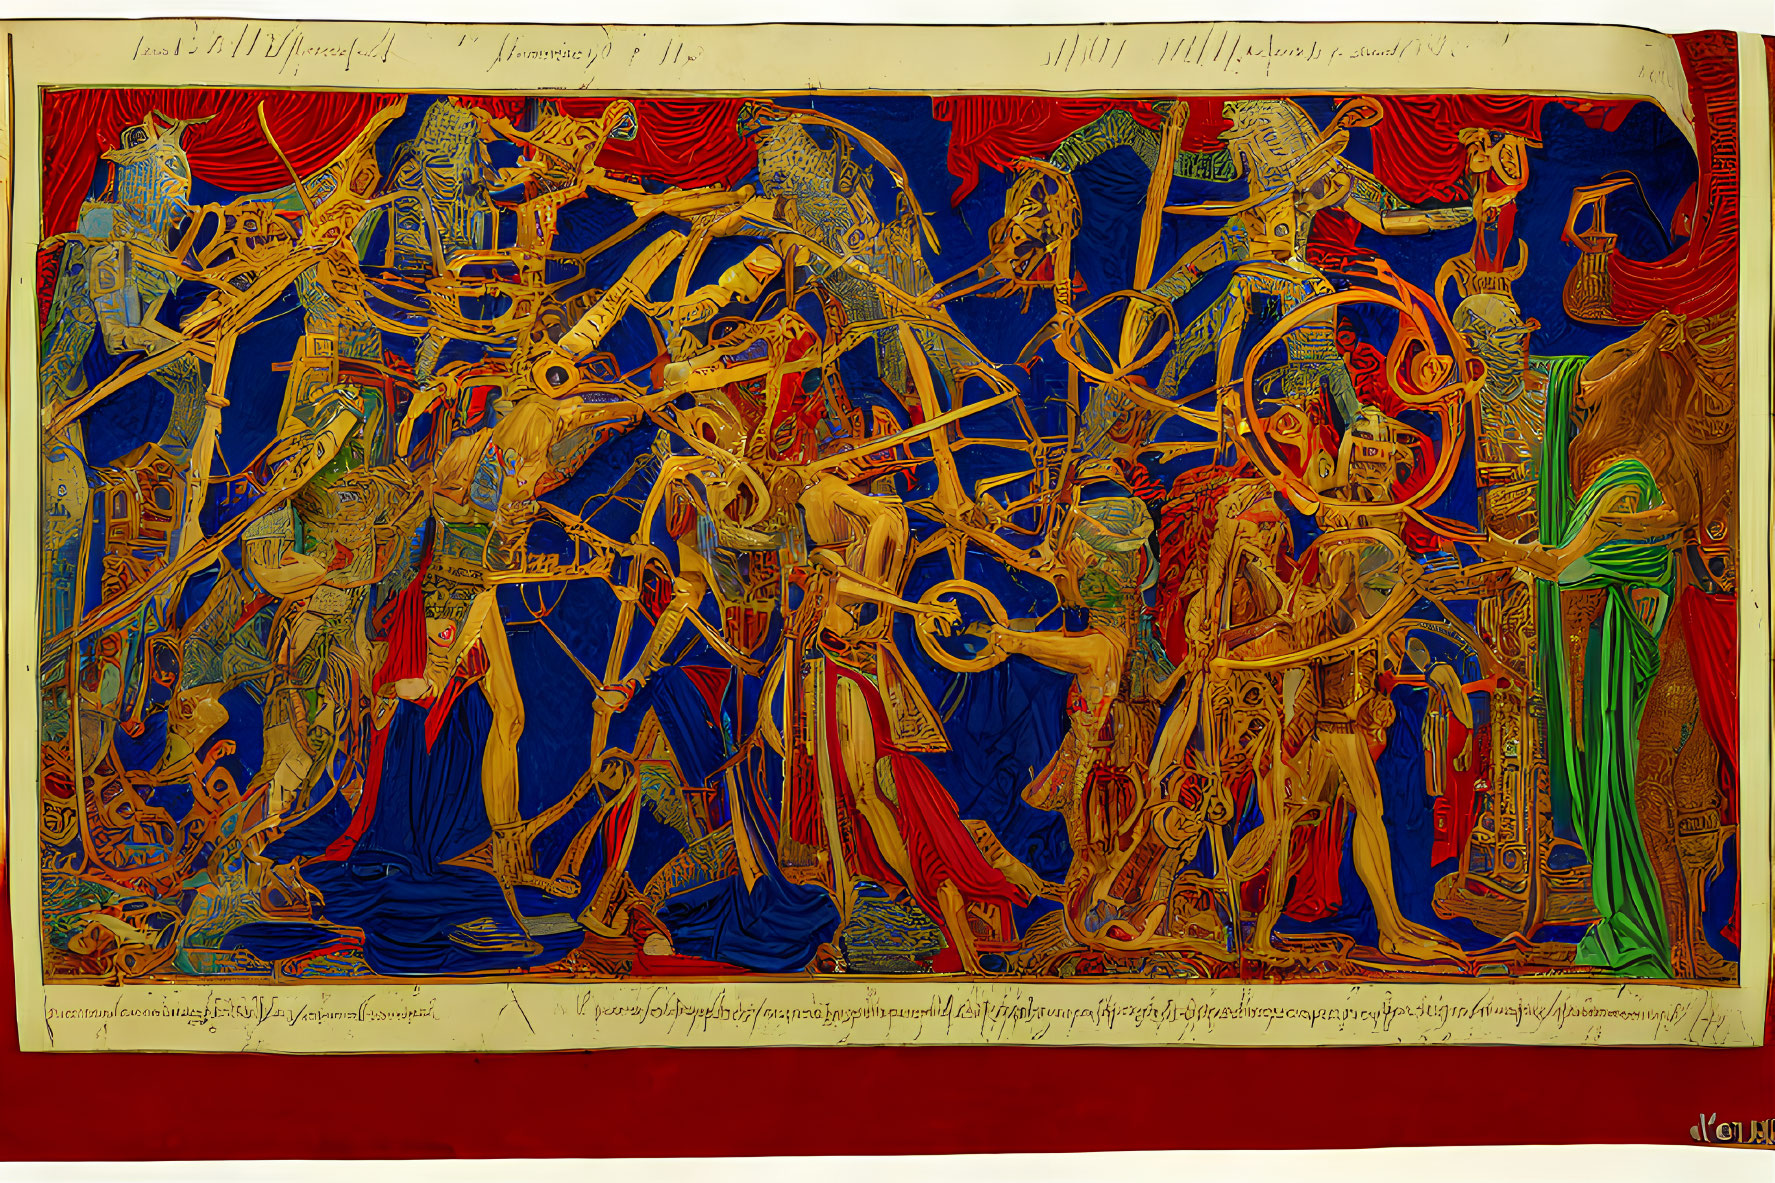 Detailed Tapestry Artwork of Chaotic Battle Scene with Skeletal Warriors in Armor on Red and Blue